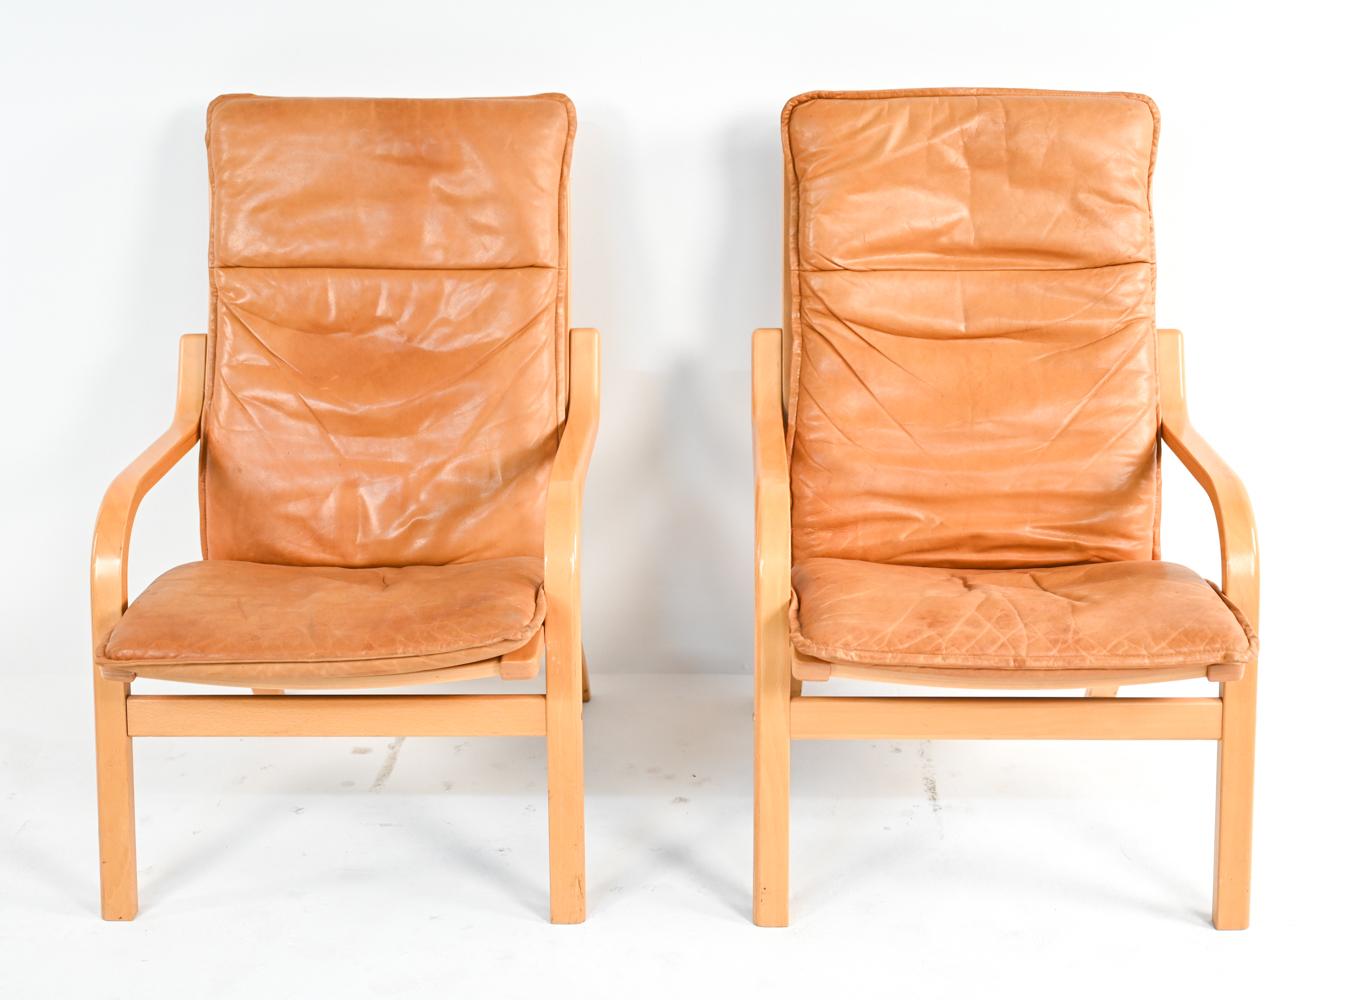 A stylish pair of Scandinavian modern highback model MH 101 lounge chairs by Mogens Hansen, produced by Stouby. Featuring sleek bentwood frames in blonde beech and handsomely patinated cognac leather cushions. These chairs are a fabulous example of